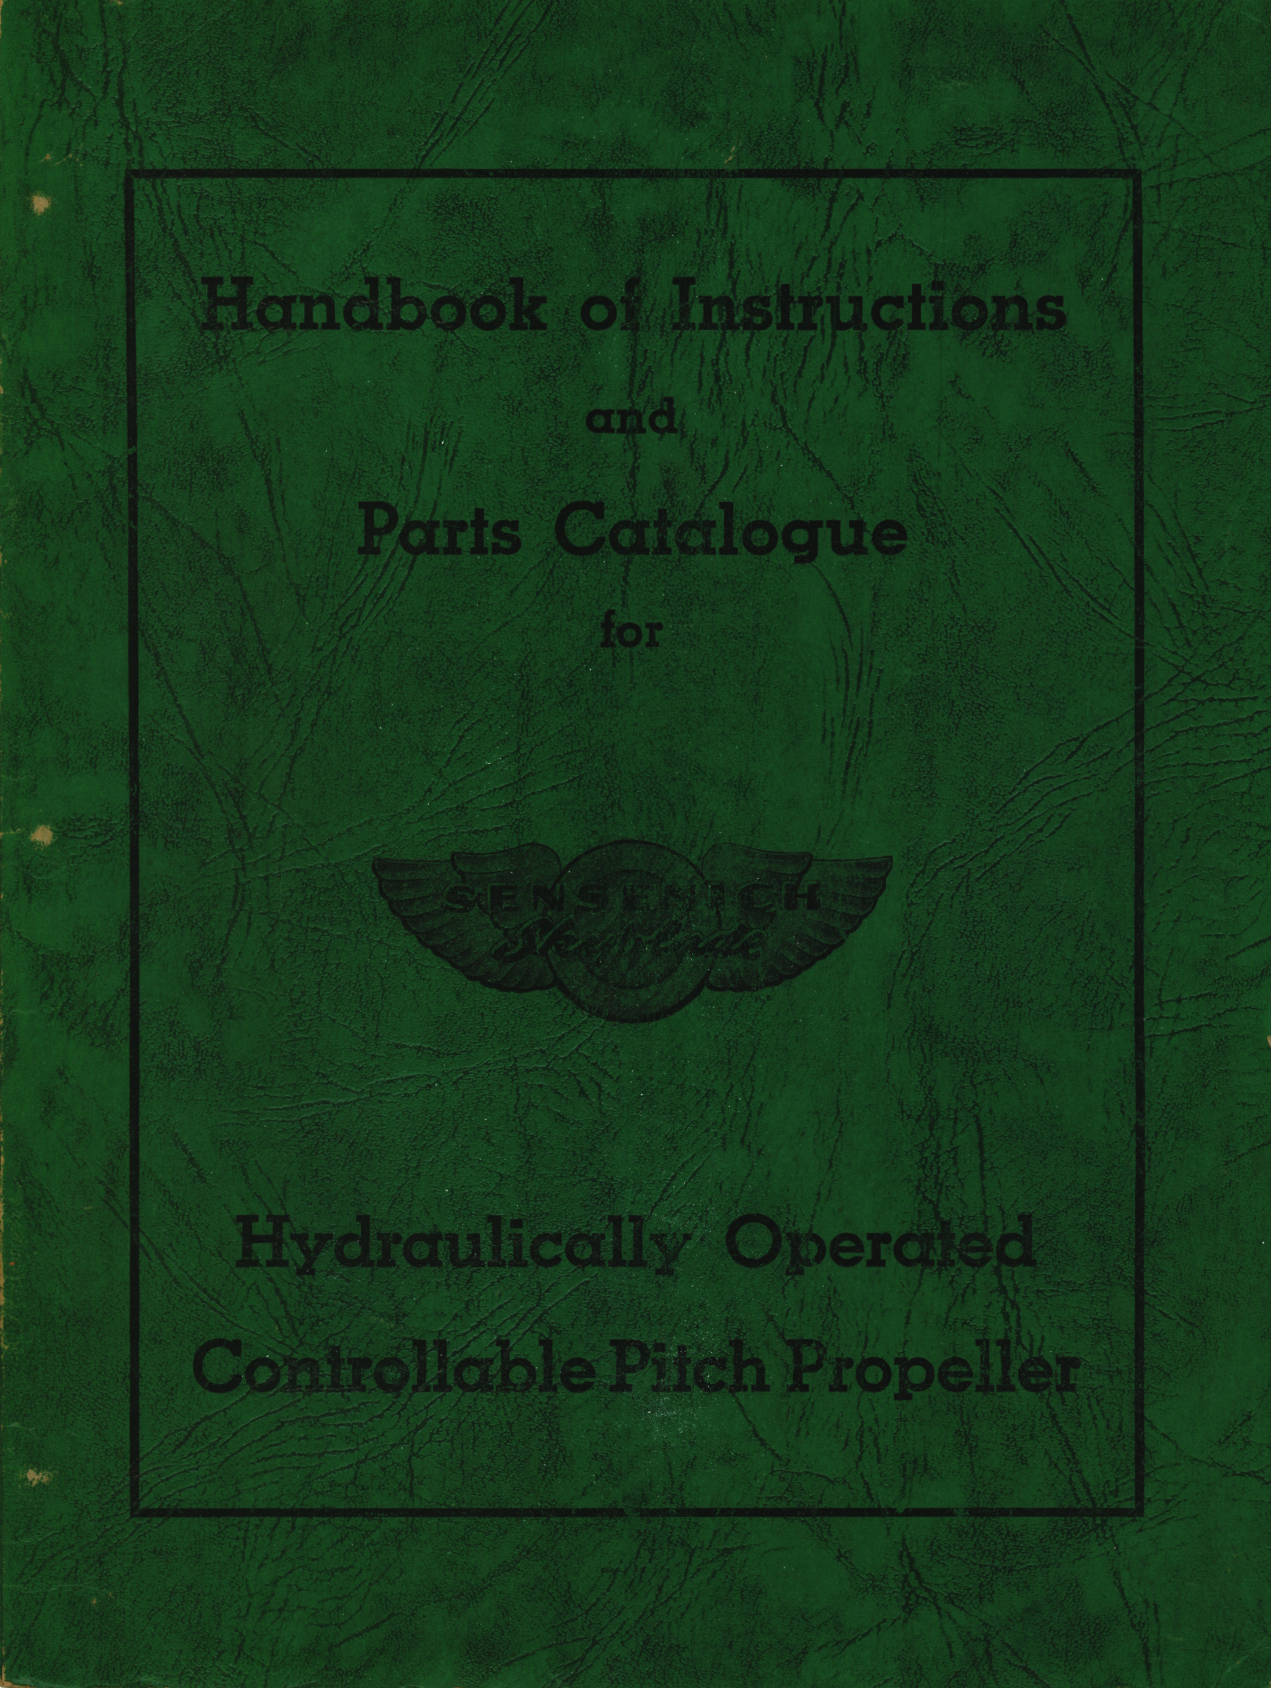 Sample page 1 from AirCorps Library document: Handbook of Instructions and Parts Catalog for Hydraulically Operated Controllable Pitch Propeller